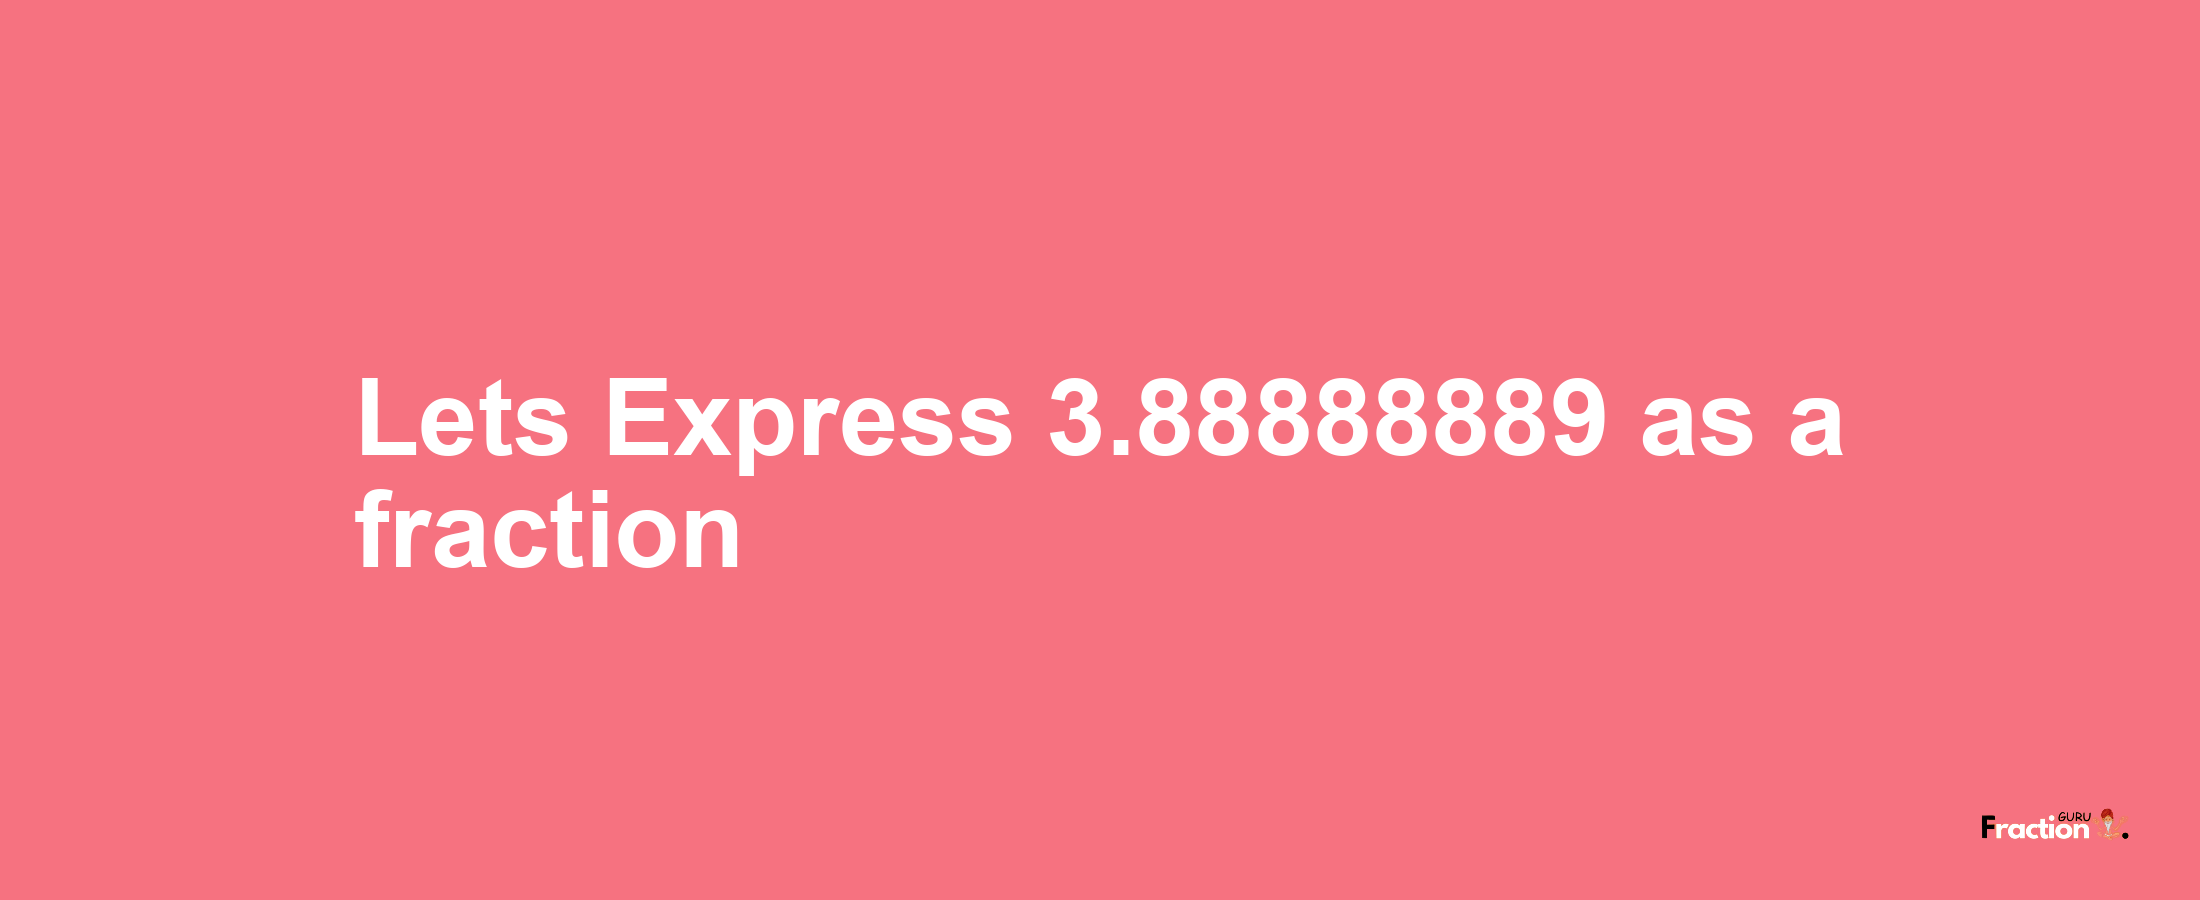 Lets Express 3.88888889 as afraction